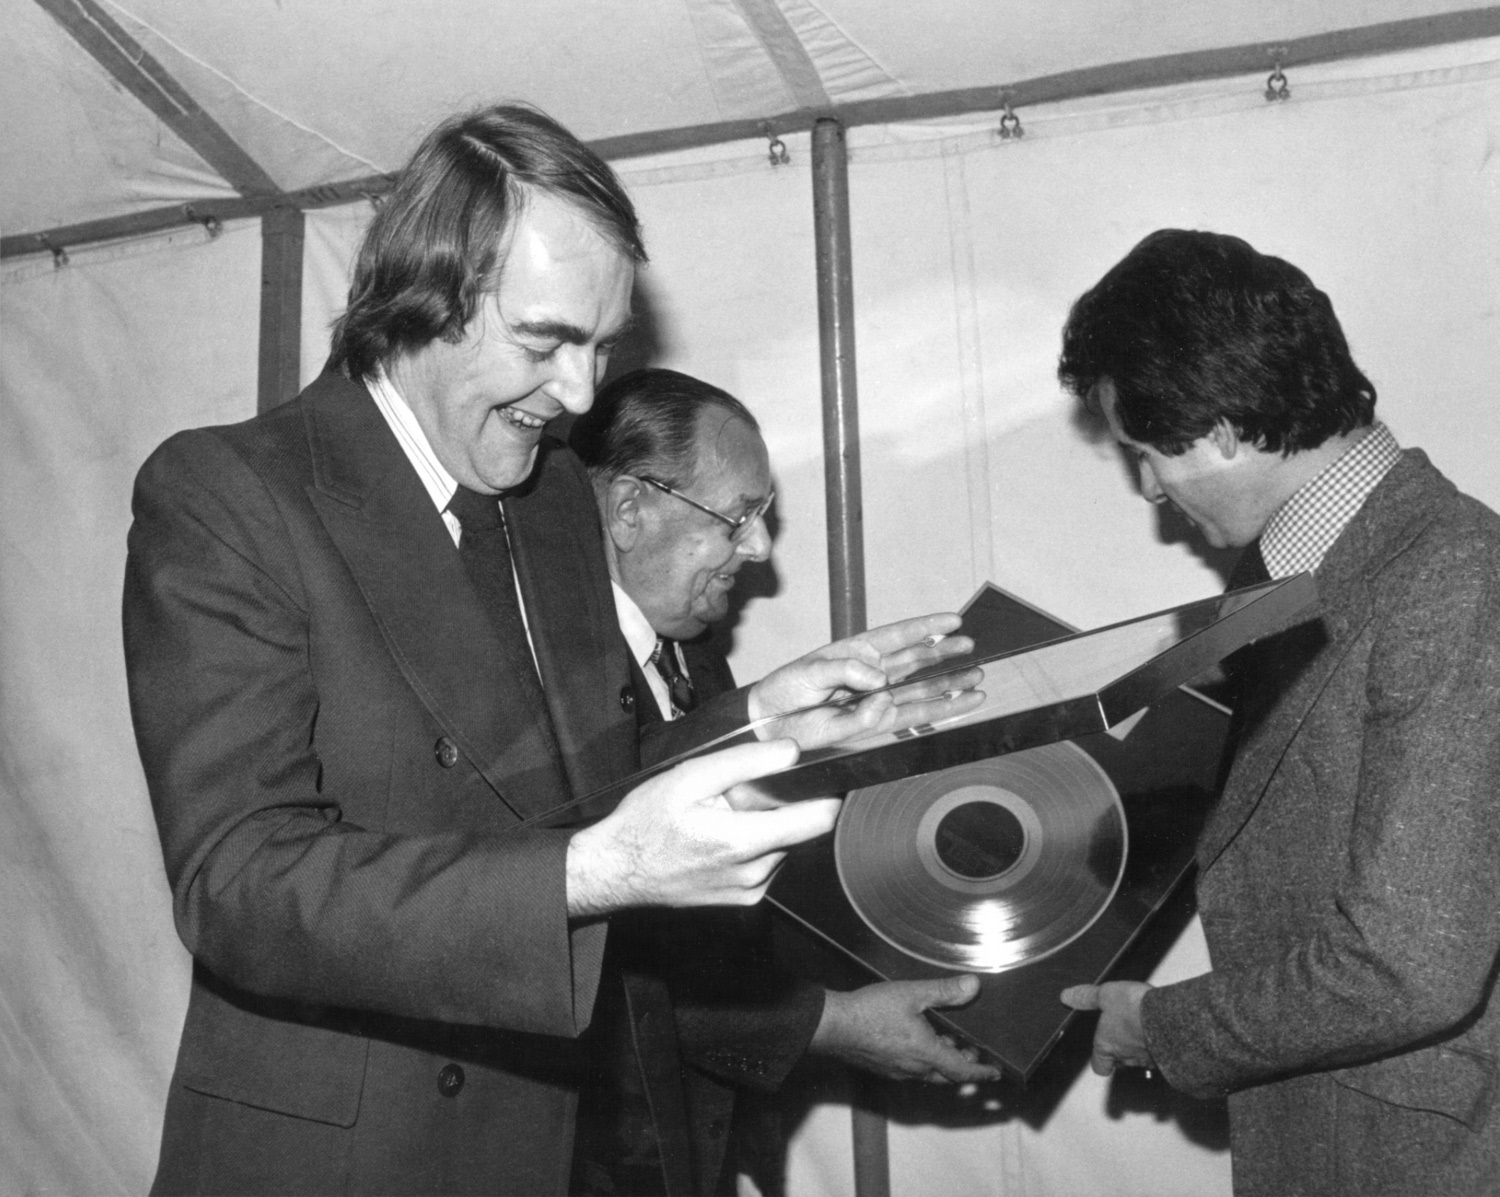 Kevin receiving a gold disc for ten years of work with The Yetties. Bob Arnold (aka Tom Forrest of The Archers) is in the background